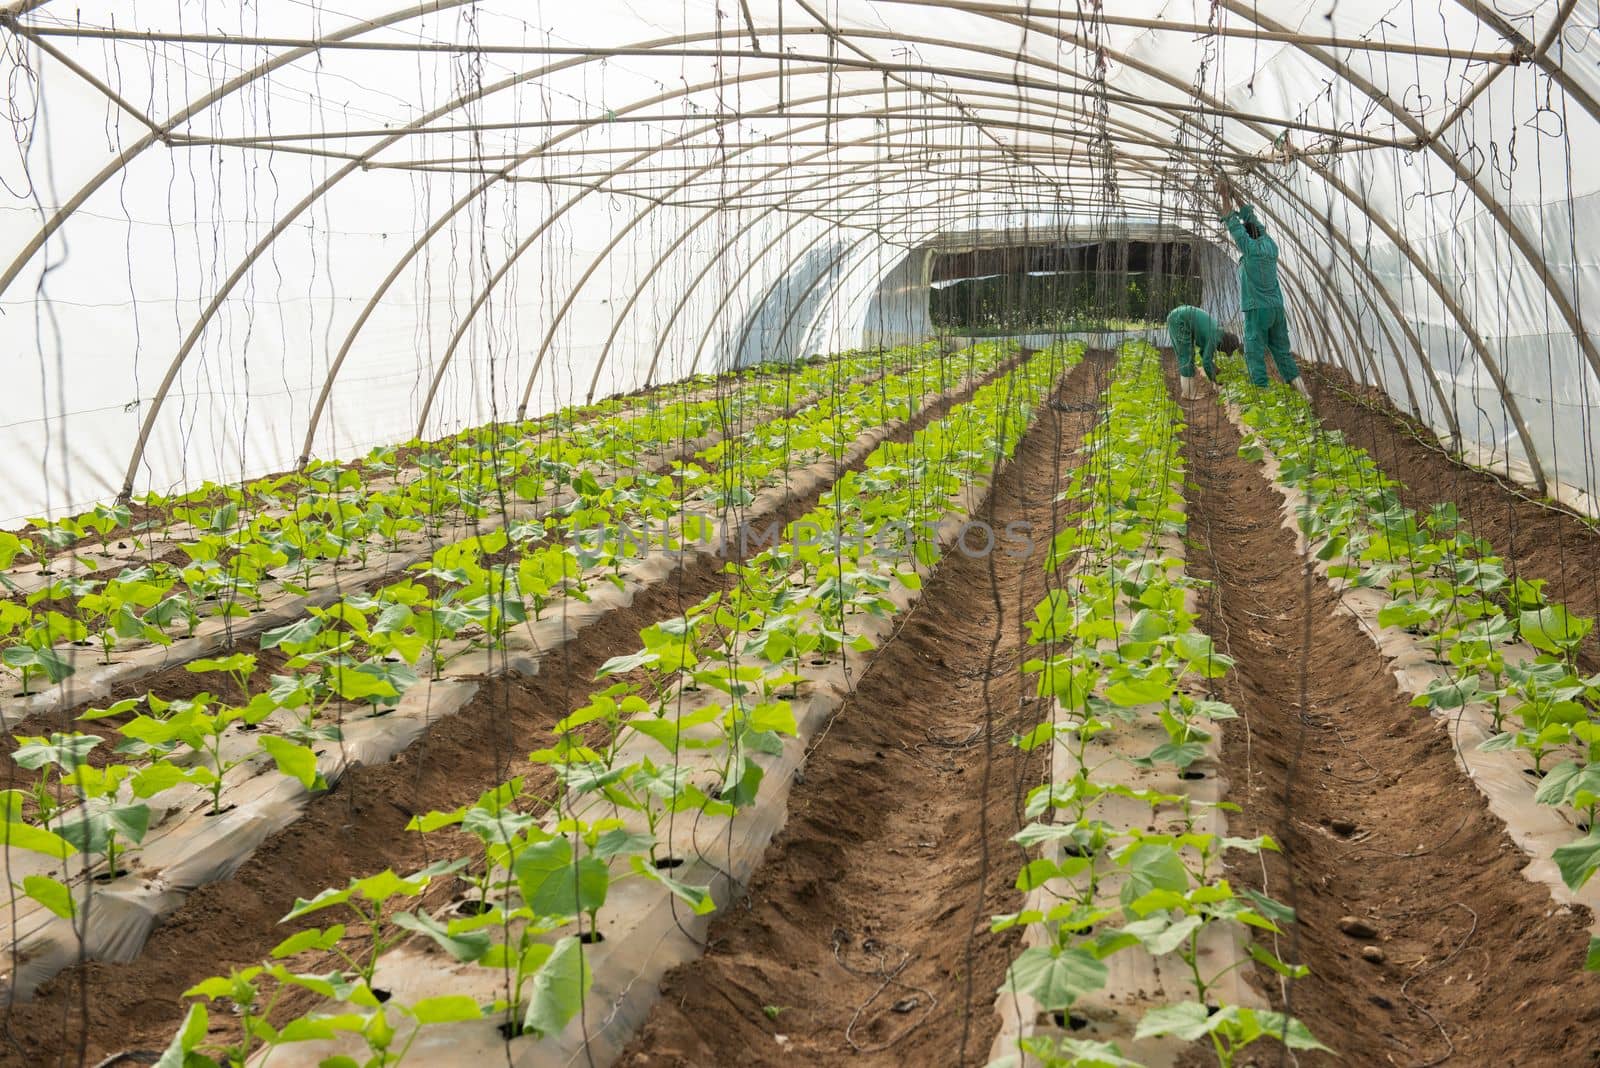 Rows of tomato plants growing indoors in a polythene greenhouse tunnel agriculture farming